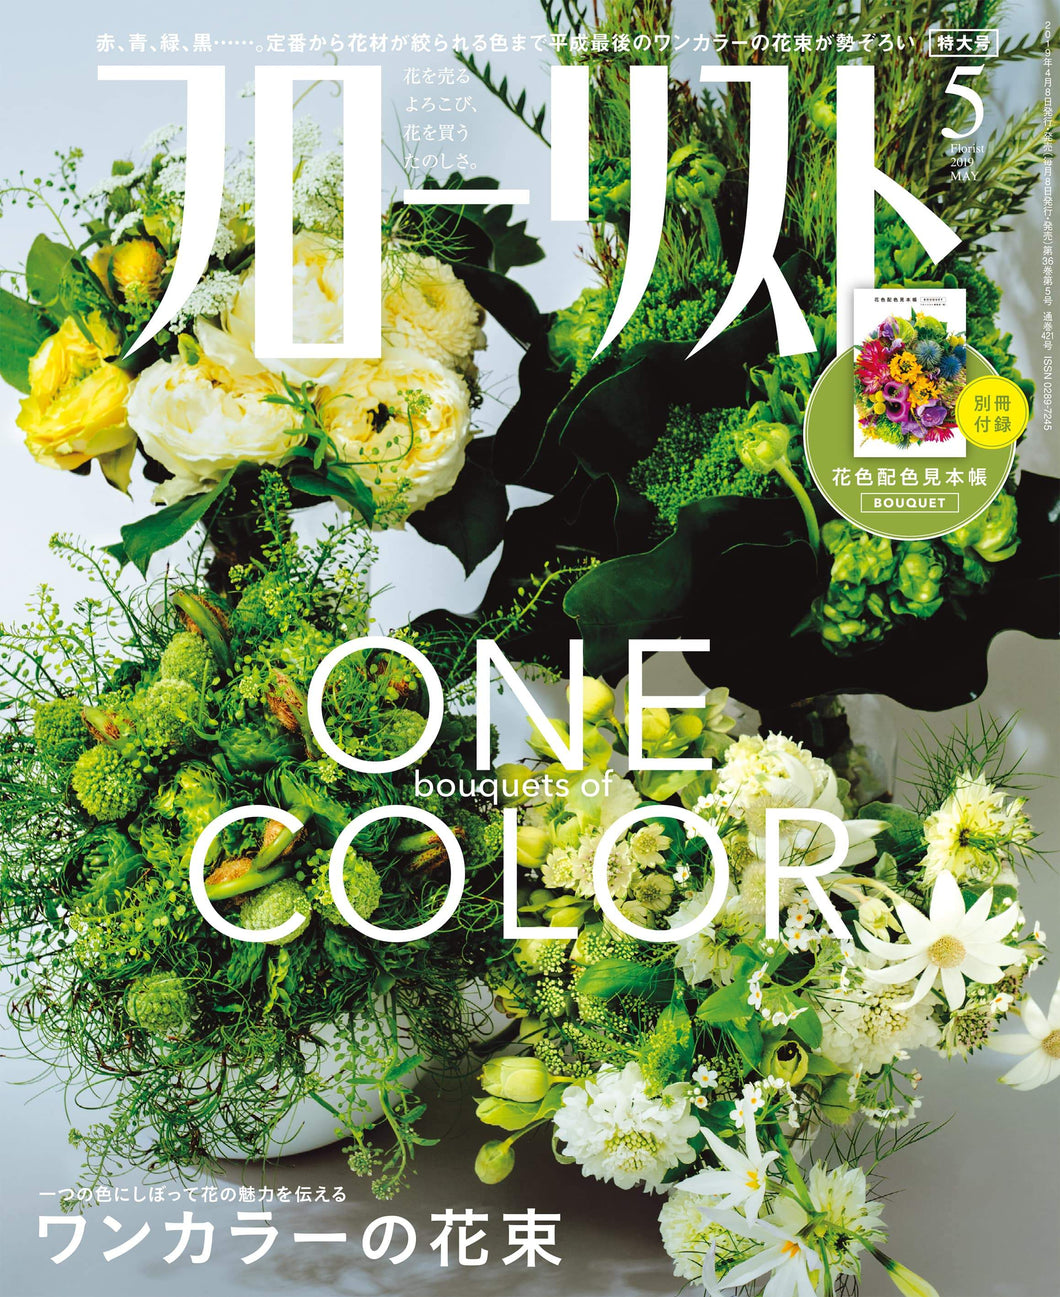 Florist May 2019 <Oversized issue with appendix>